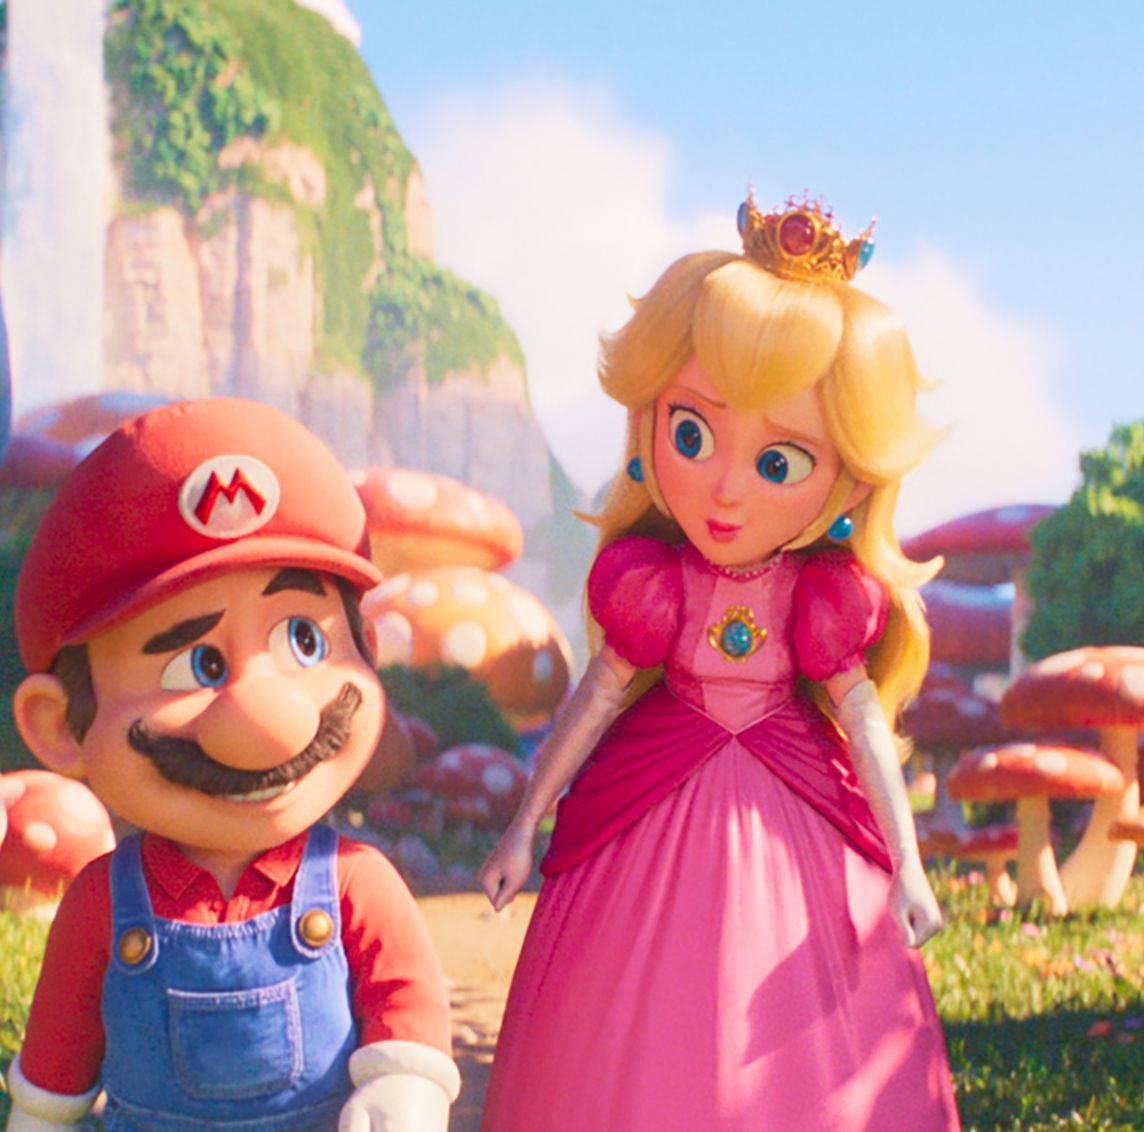 The Super Mario Bros. Movie' is far more style than substance. - Gateway